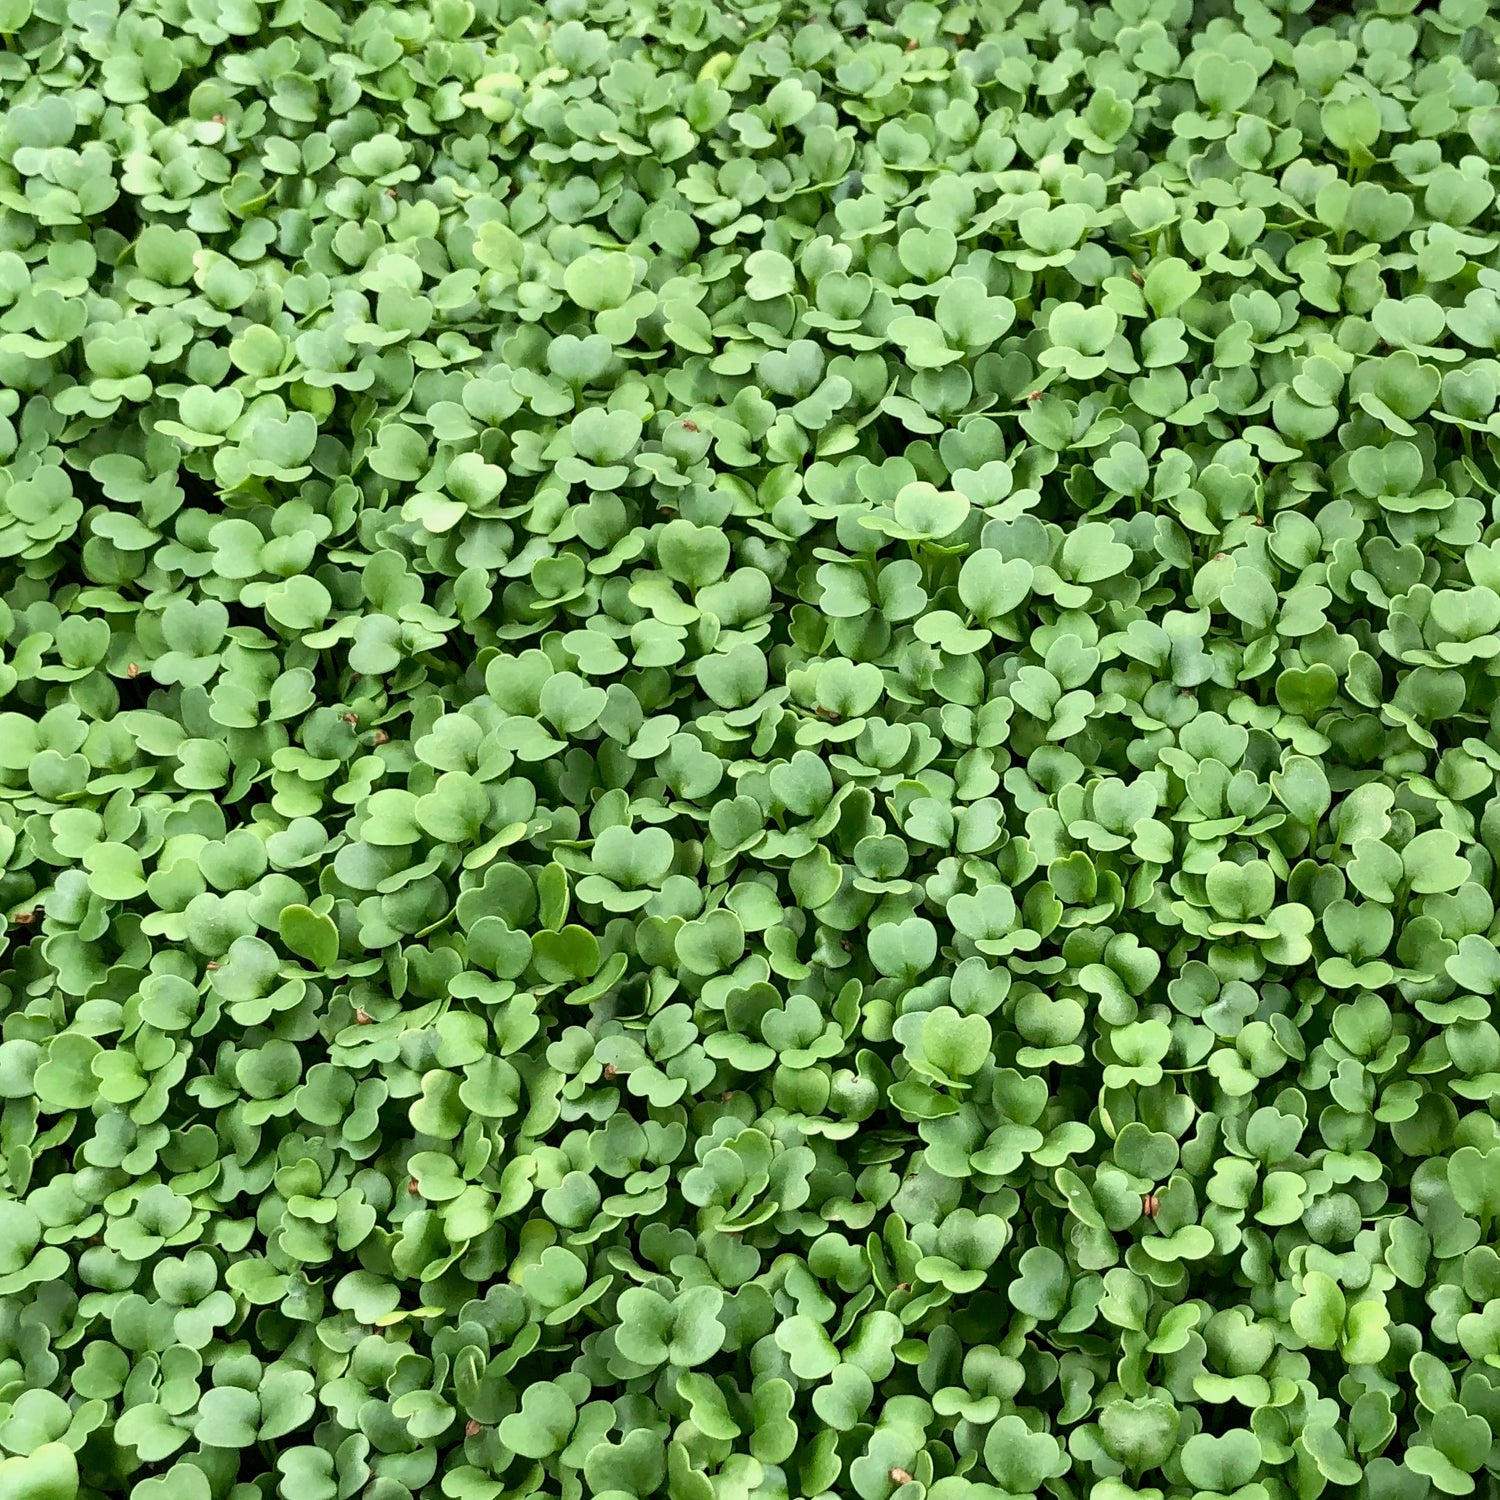 Broccoli microgreens have heart shaped leaves that are bright green